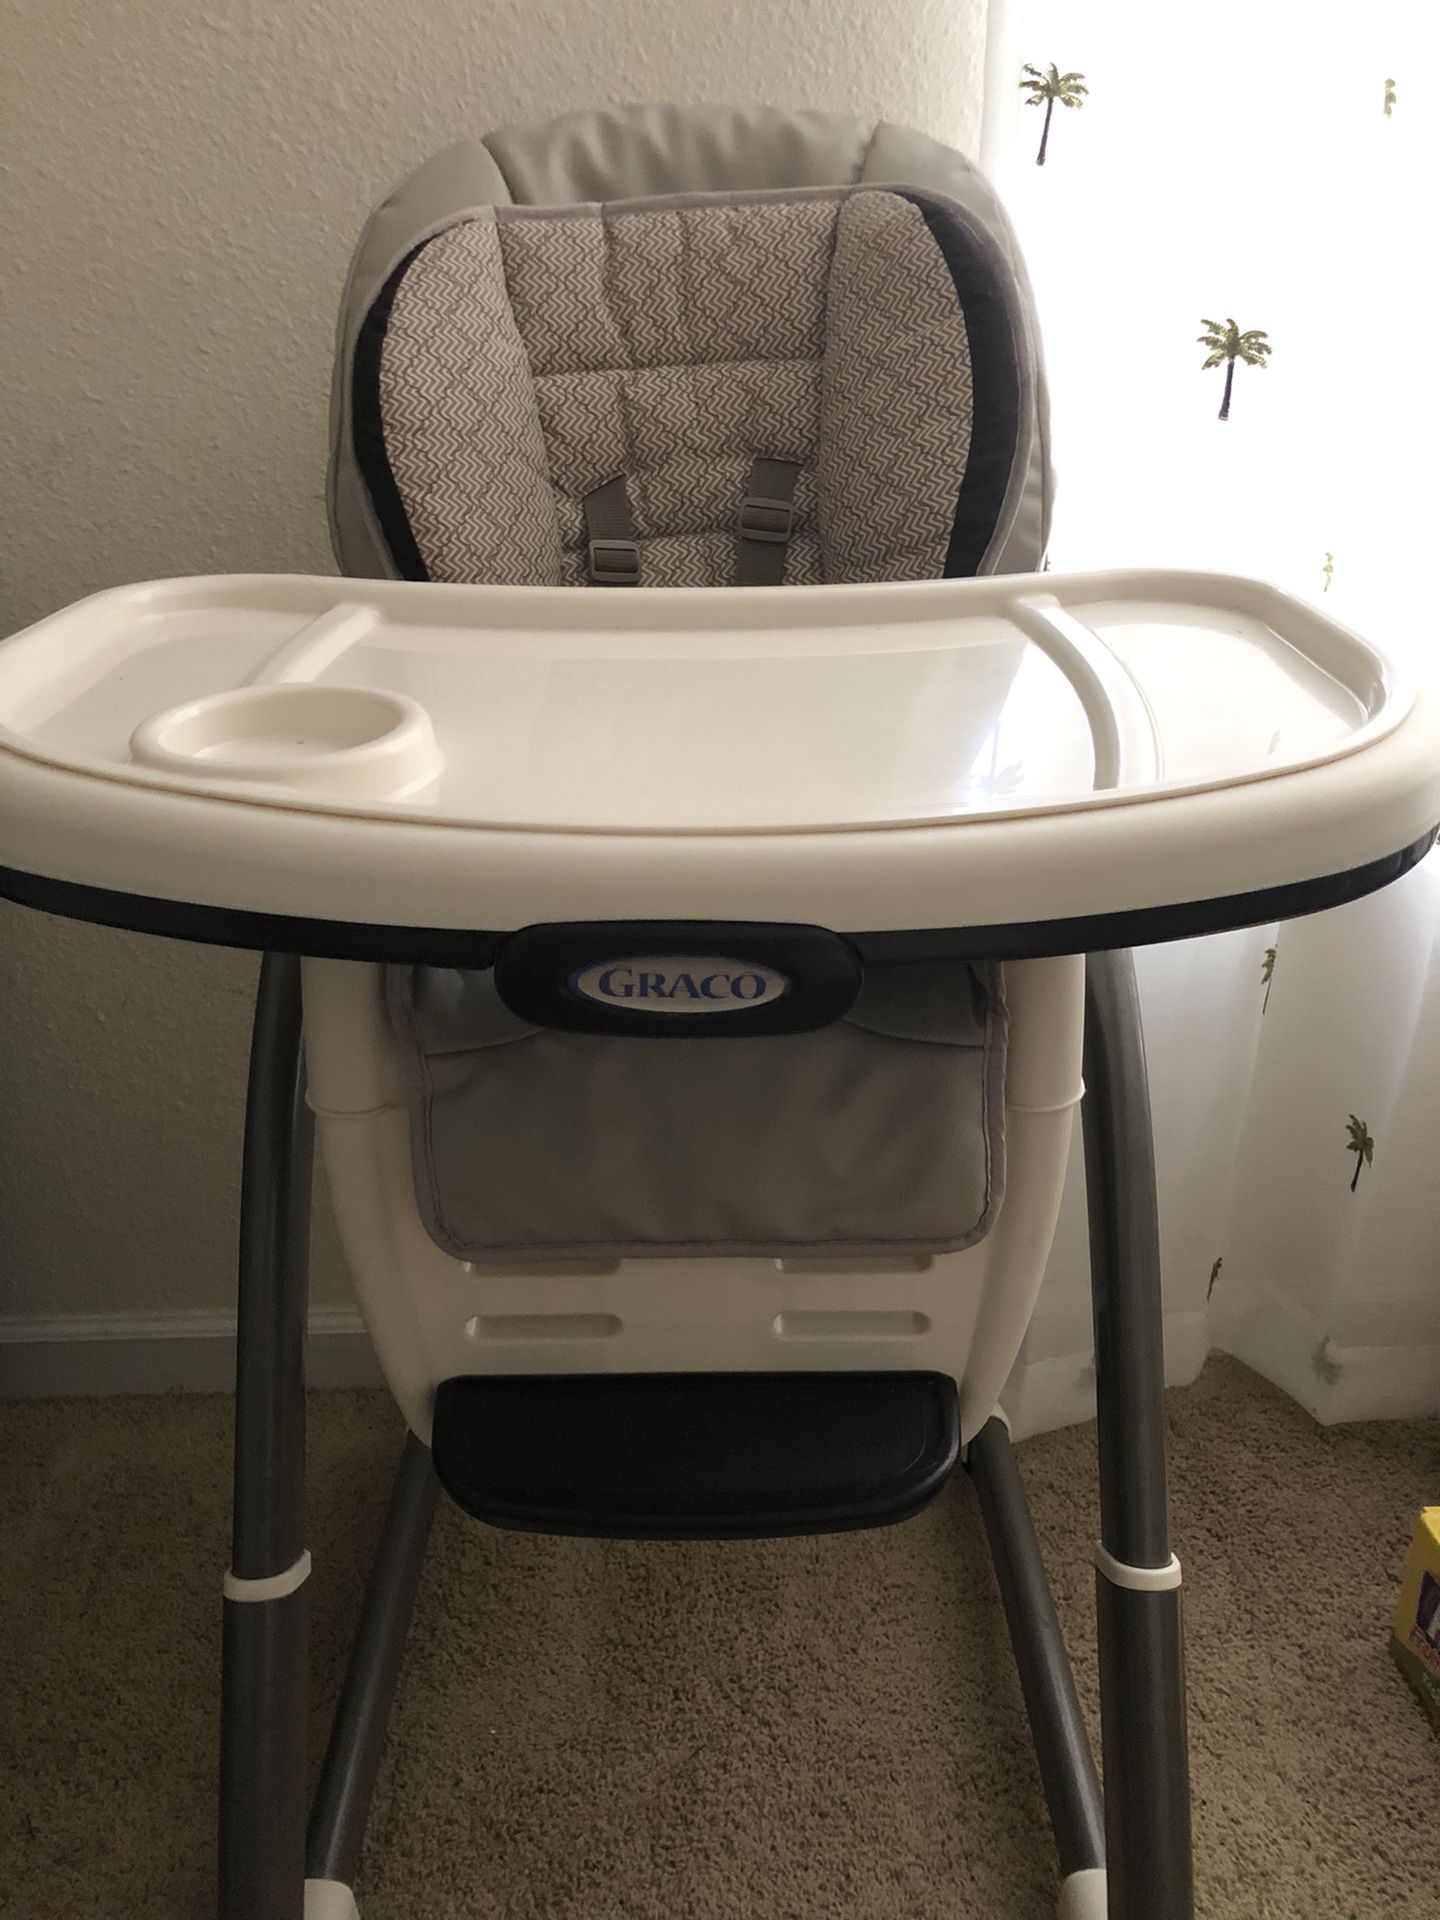 Graco leather high chair